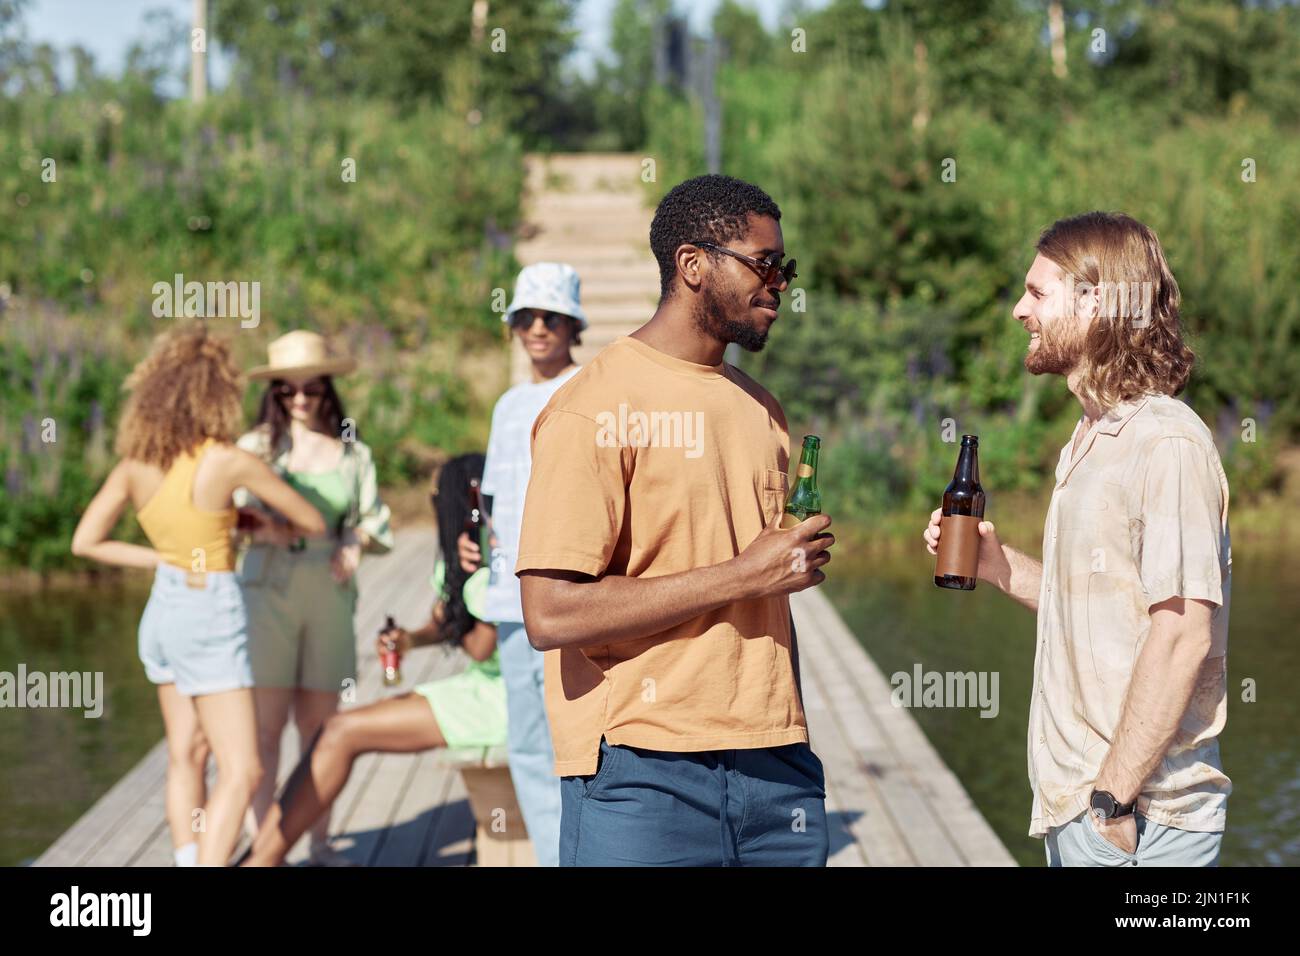 Side view portrait of two young men drinking beer outdoors in Summer and chatting Stock Photo